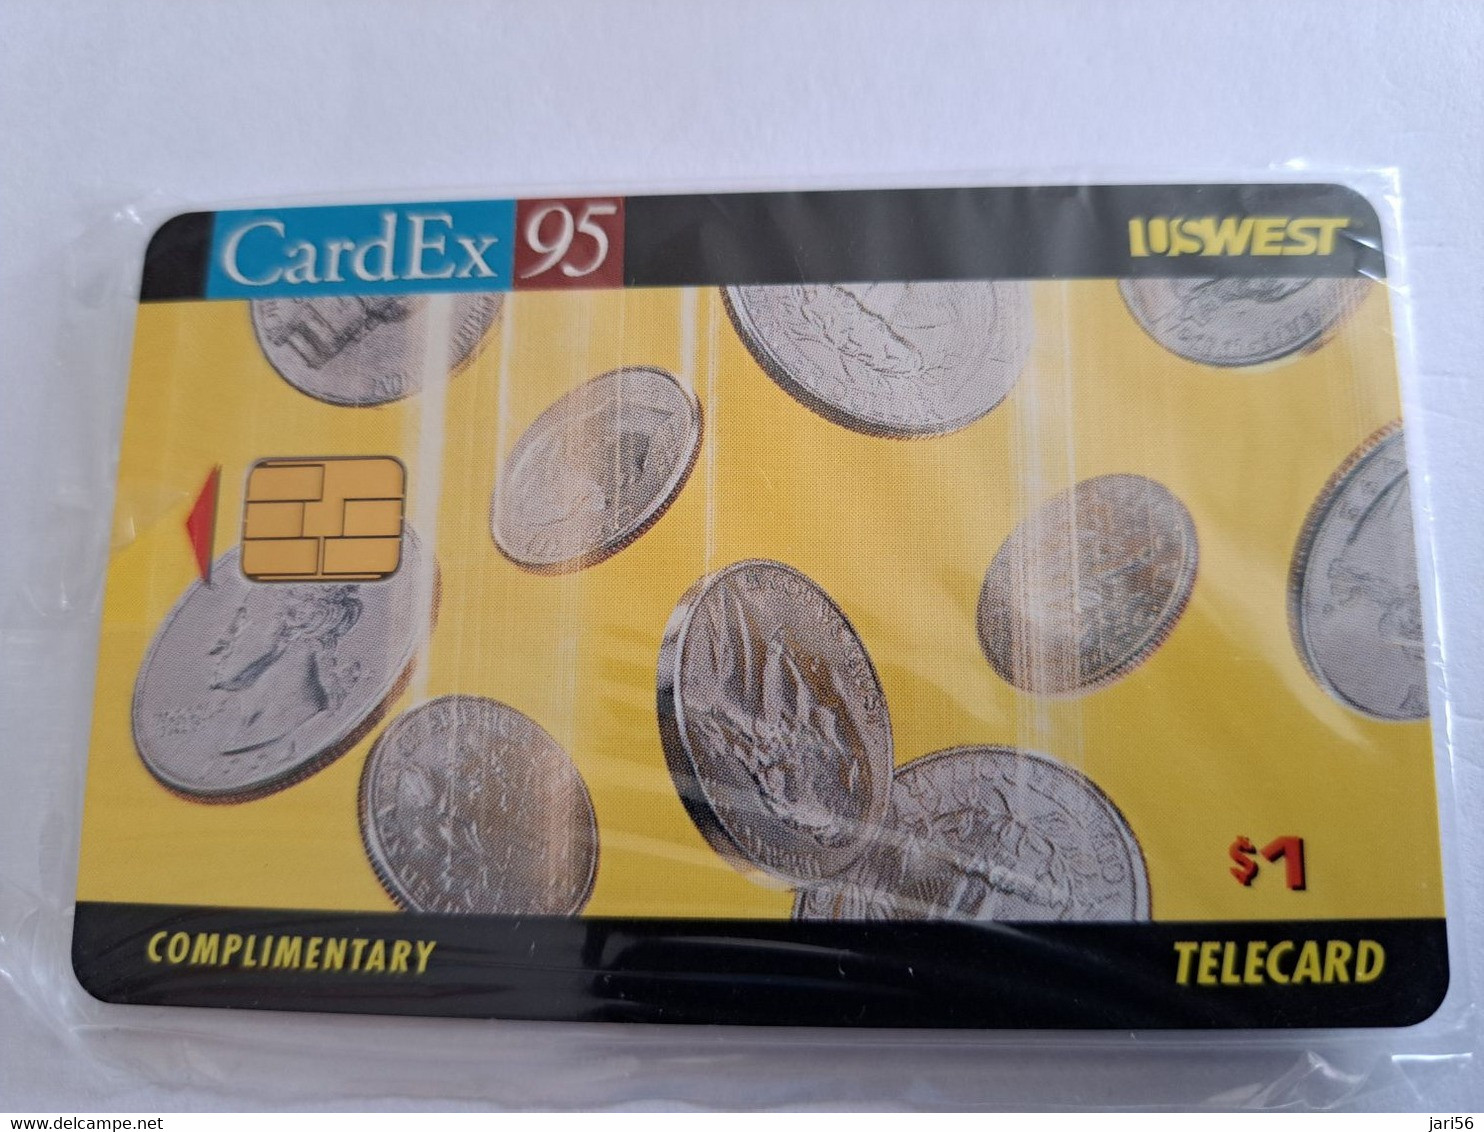 USA  ALASKA  CHIP  $1,00 CARDEX 95 US WEST /COMPLIMENTARY  MINT IN WRAPPER    **10574** - [2] Chip Cards